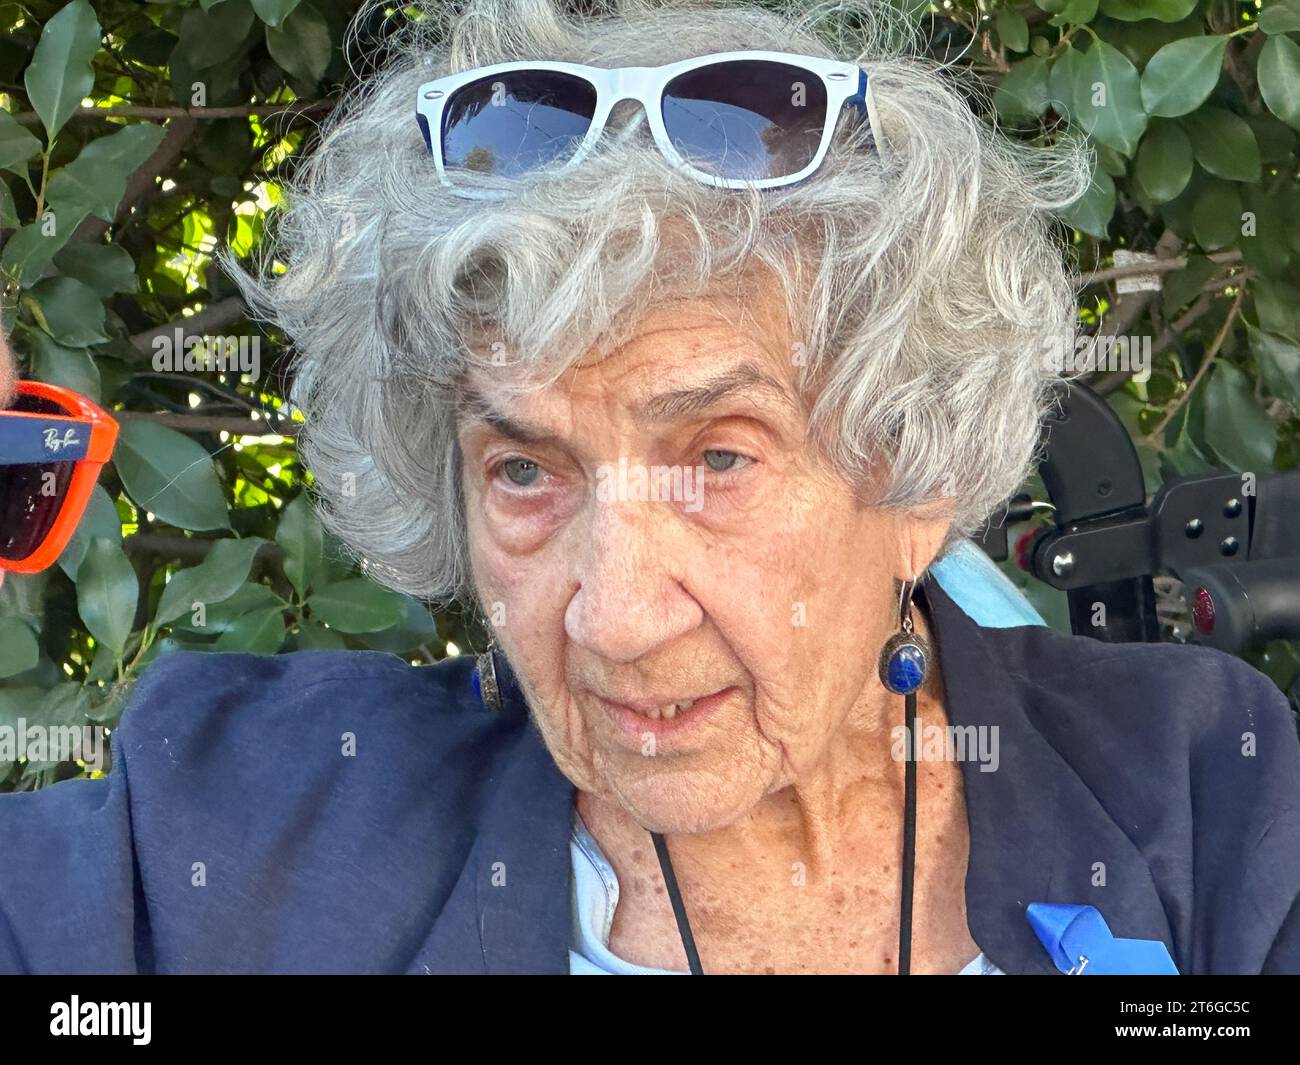 Santa Barbara, California, USA. 9th Nov, 2023. Rose Jaffee was married to a Holocaust survivor for over 70 years: the late Norman Jaffe, and on Nov. 9, 2023 she shared his harrowing story of wits and survival, along with his secret to thriving inspire of the horrors he faced: 'forgiveness''. November 9 is the 85th anniversary of Kristallnacht, (German for 'Night of Broken Glass'') when Nazis unleashed an orchestrated wave of violence against Jews in Germany and Austria to force them out of the country. More than one hundred Jews were murdered and thousands of Jewish institutions, sy Stock Photo